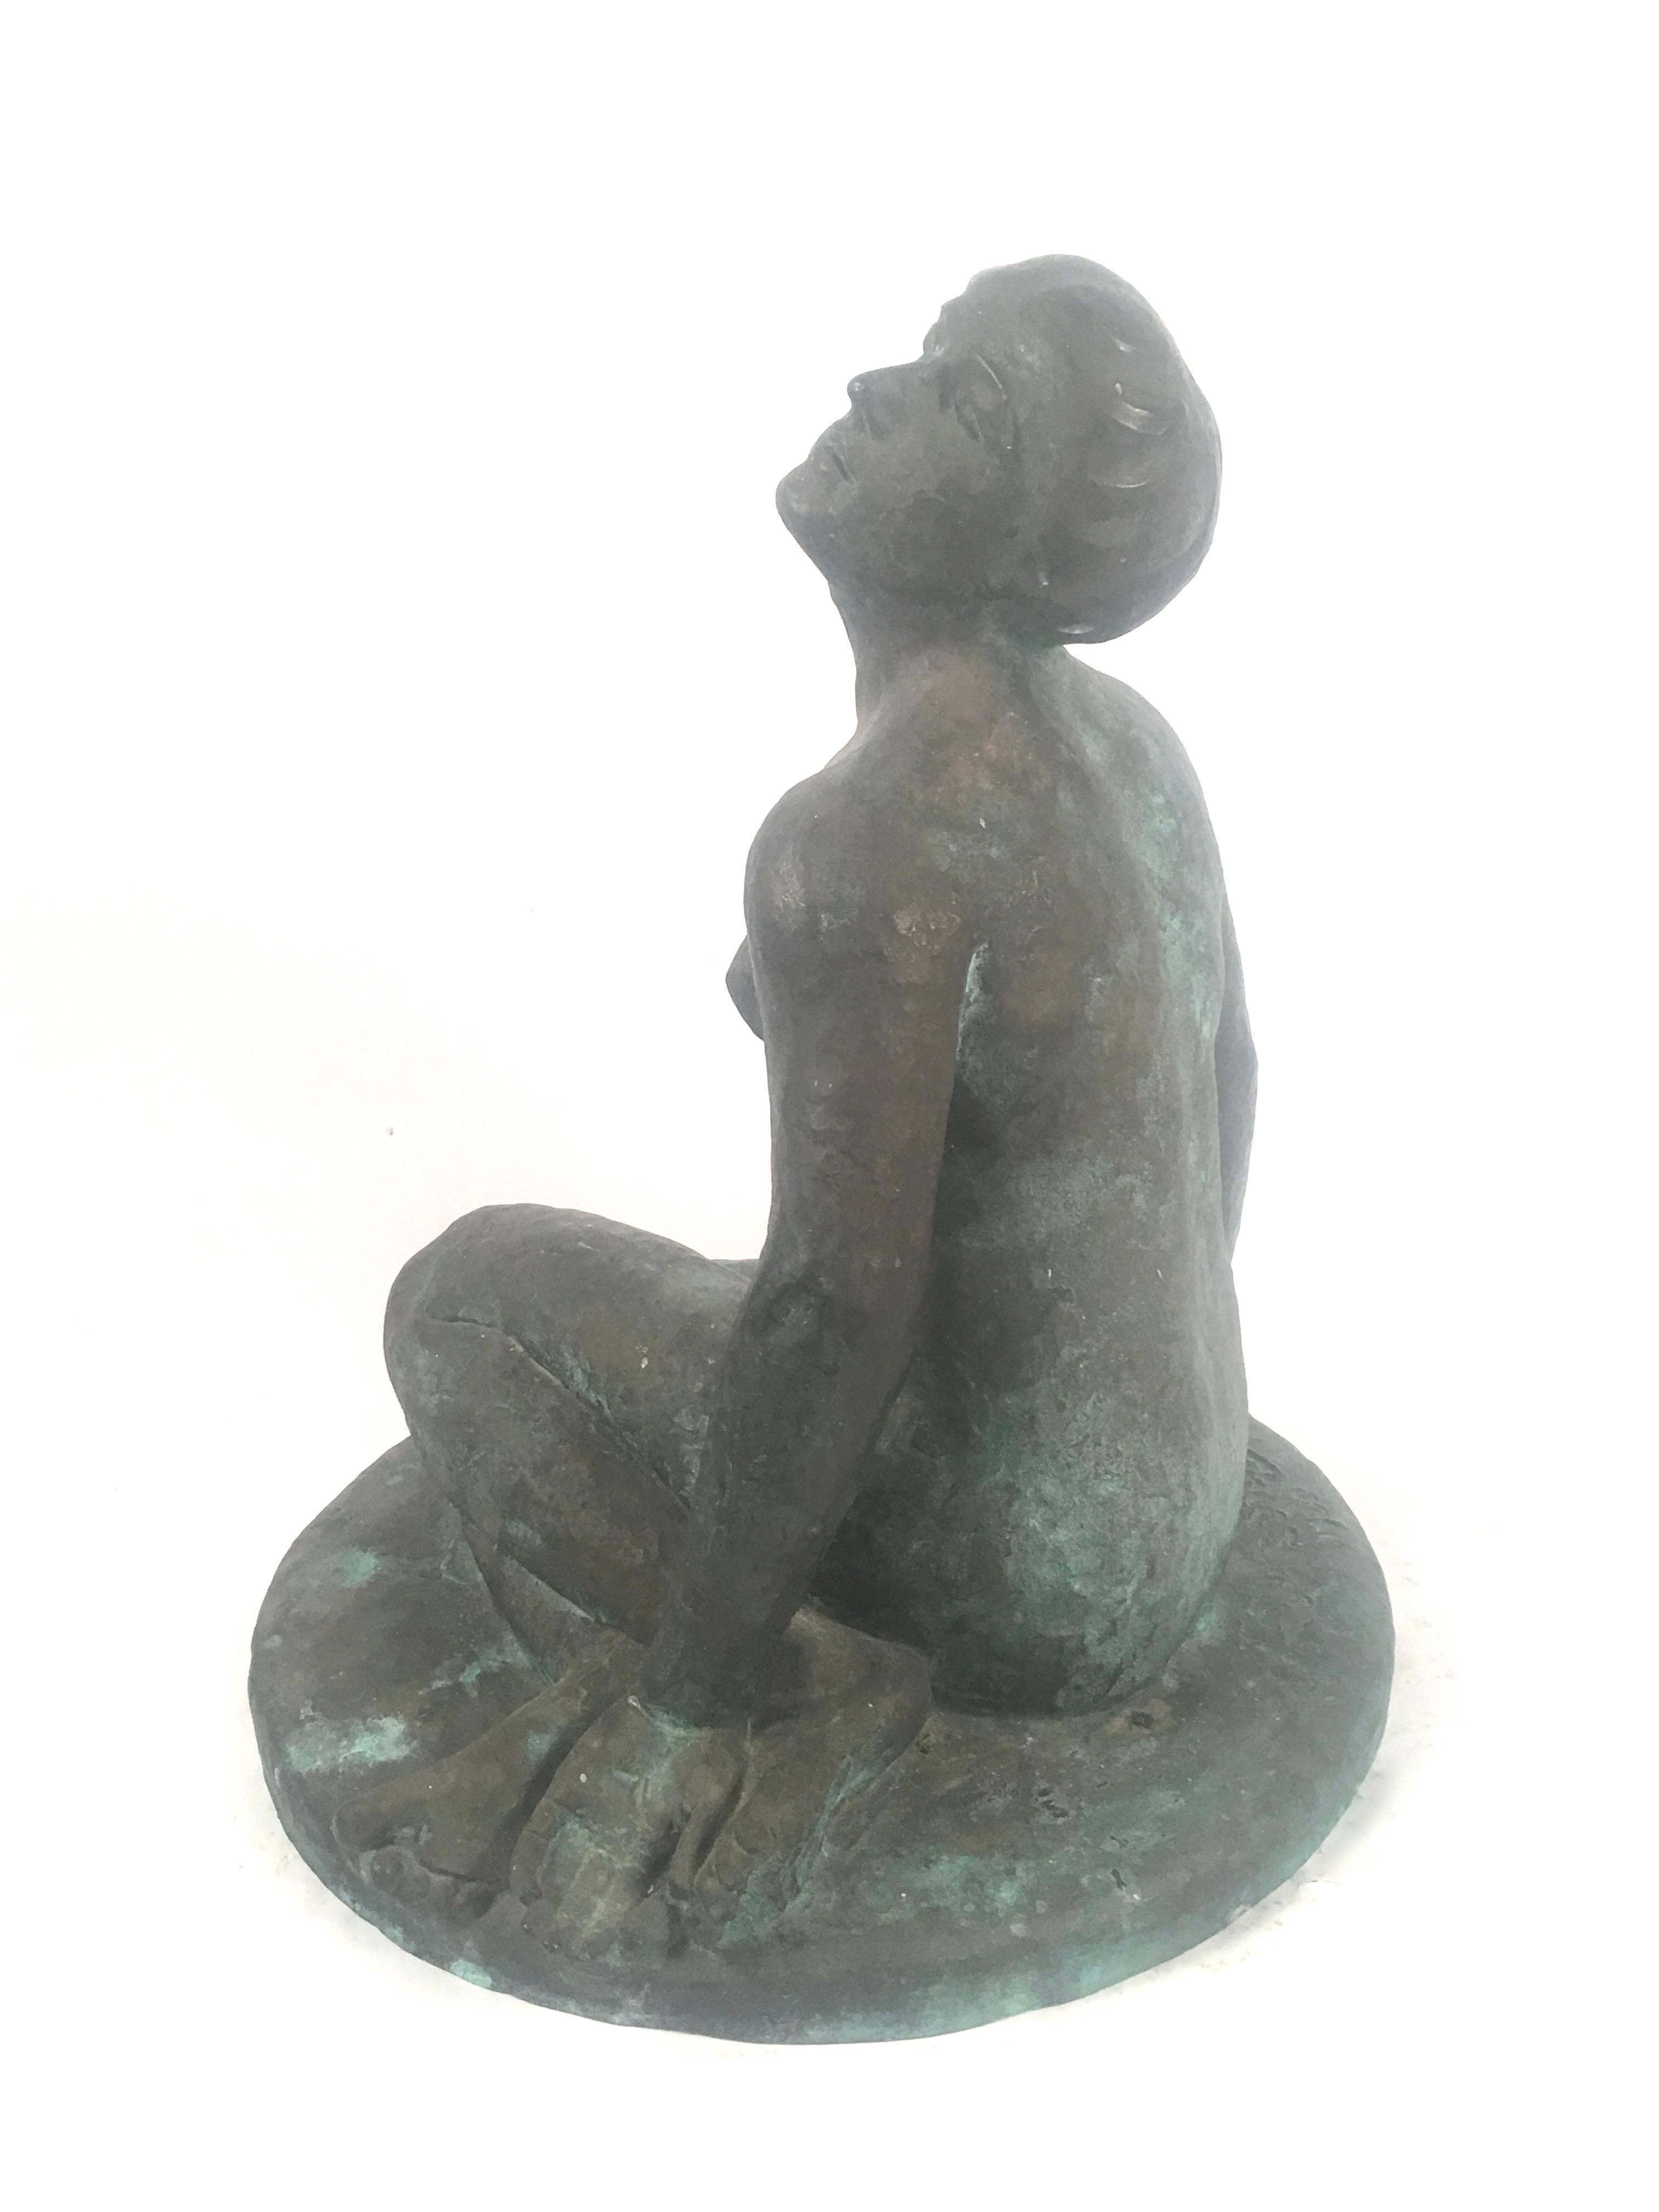 Swiss Bronze Sculpture of a Seated Nude Woman by Leo Berger